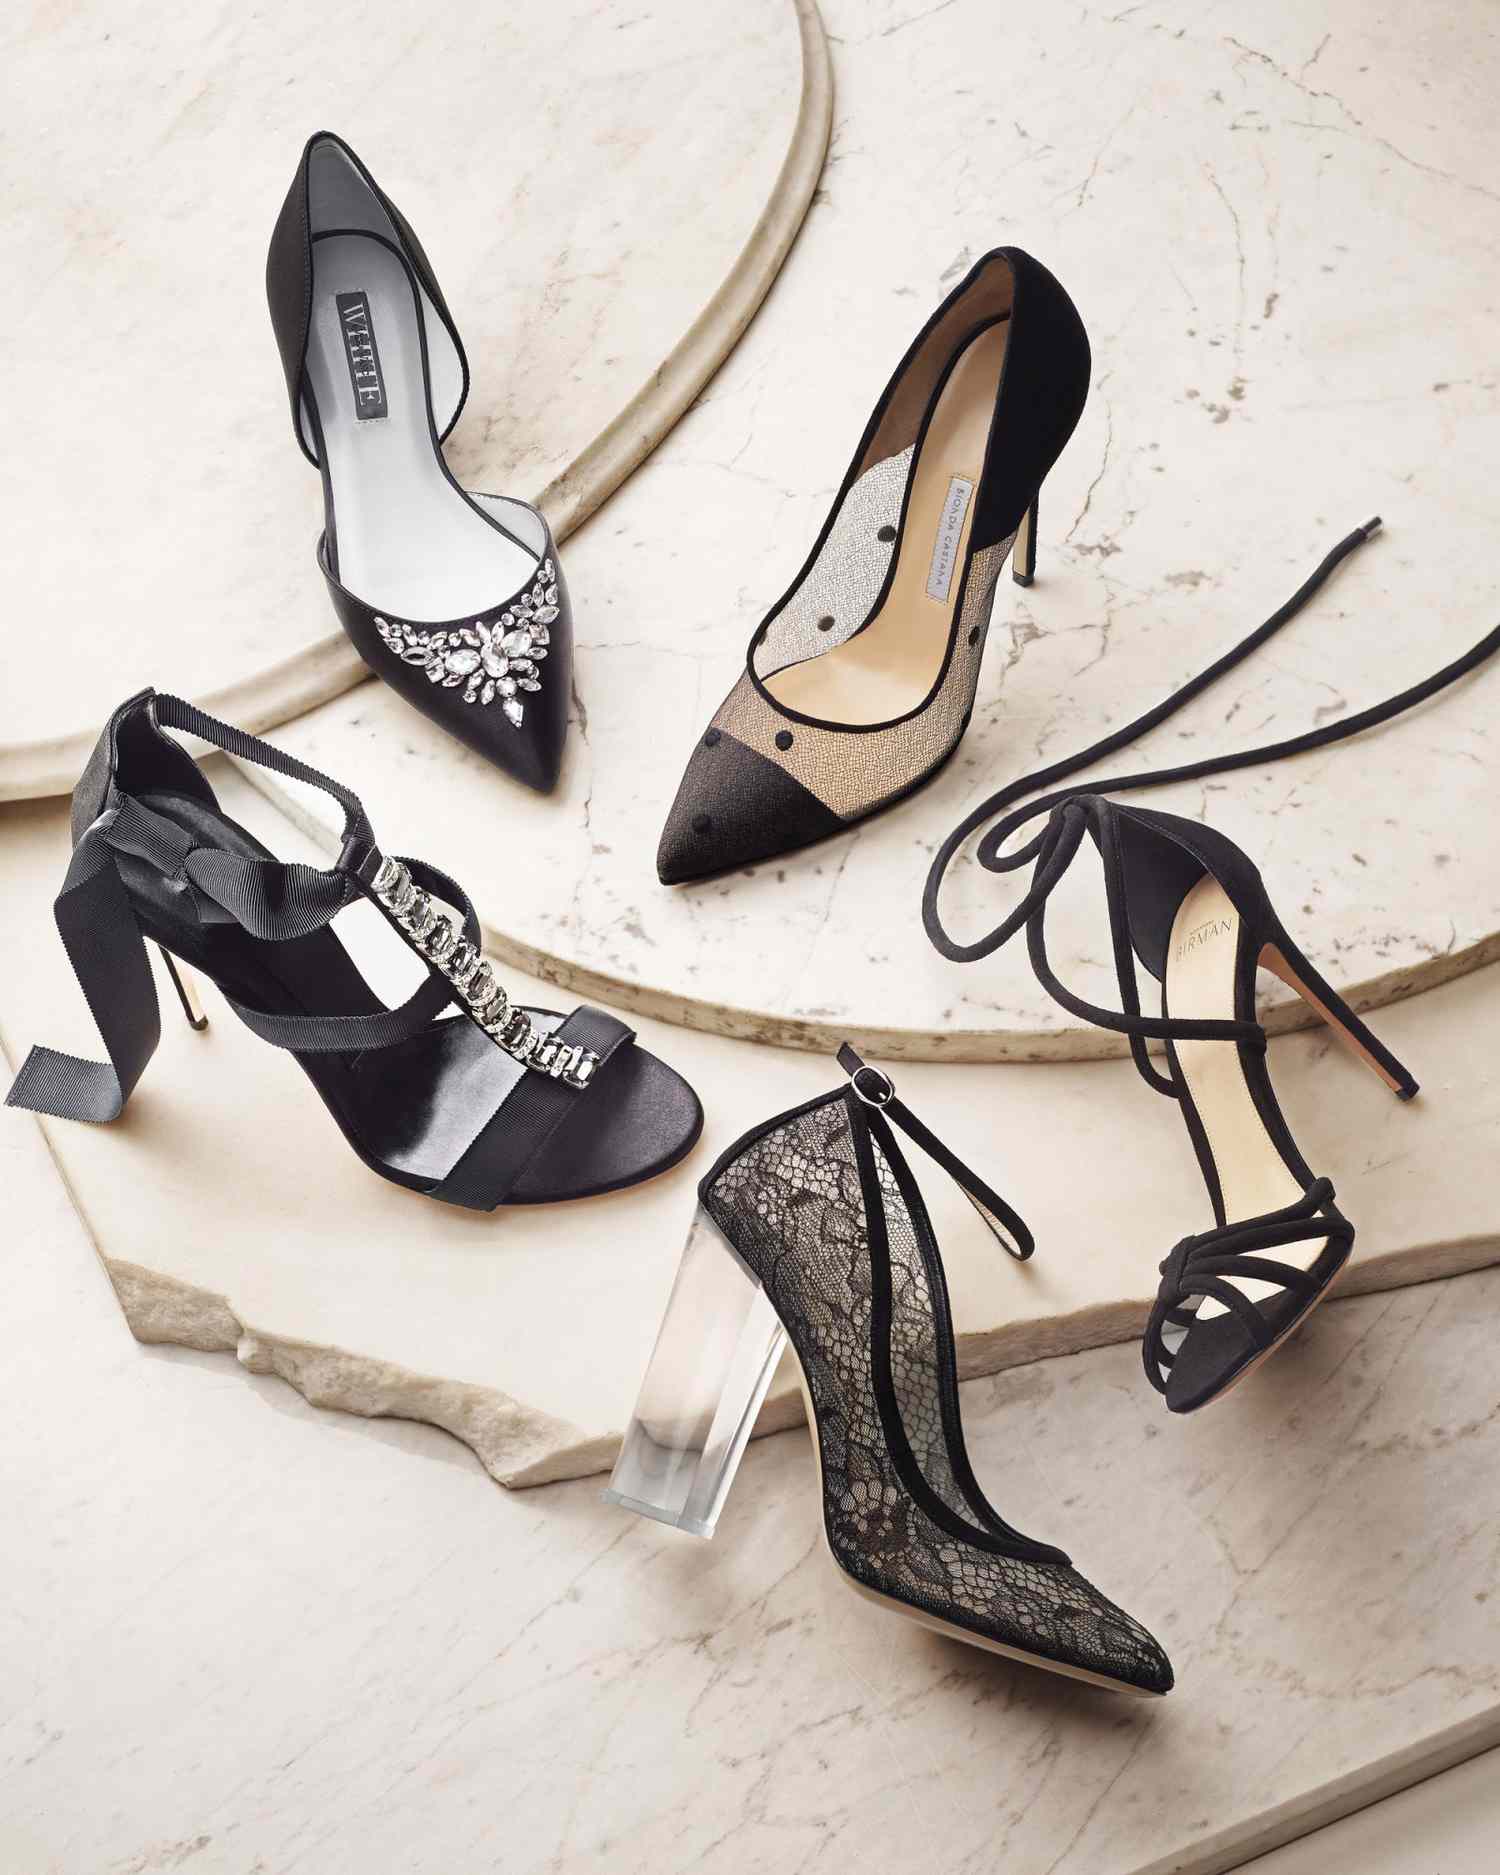 Our Favorite Black Wedding Shoes for 